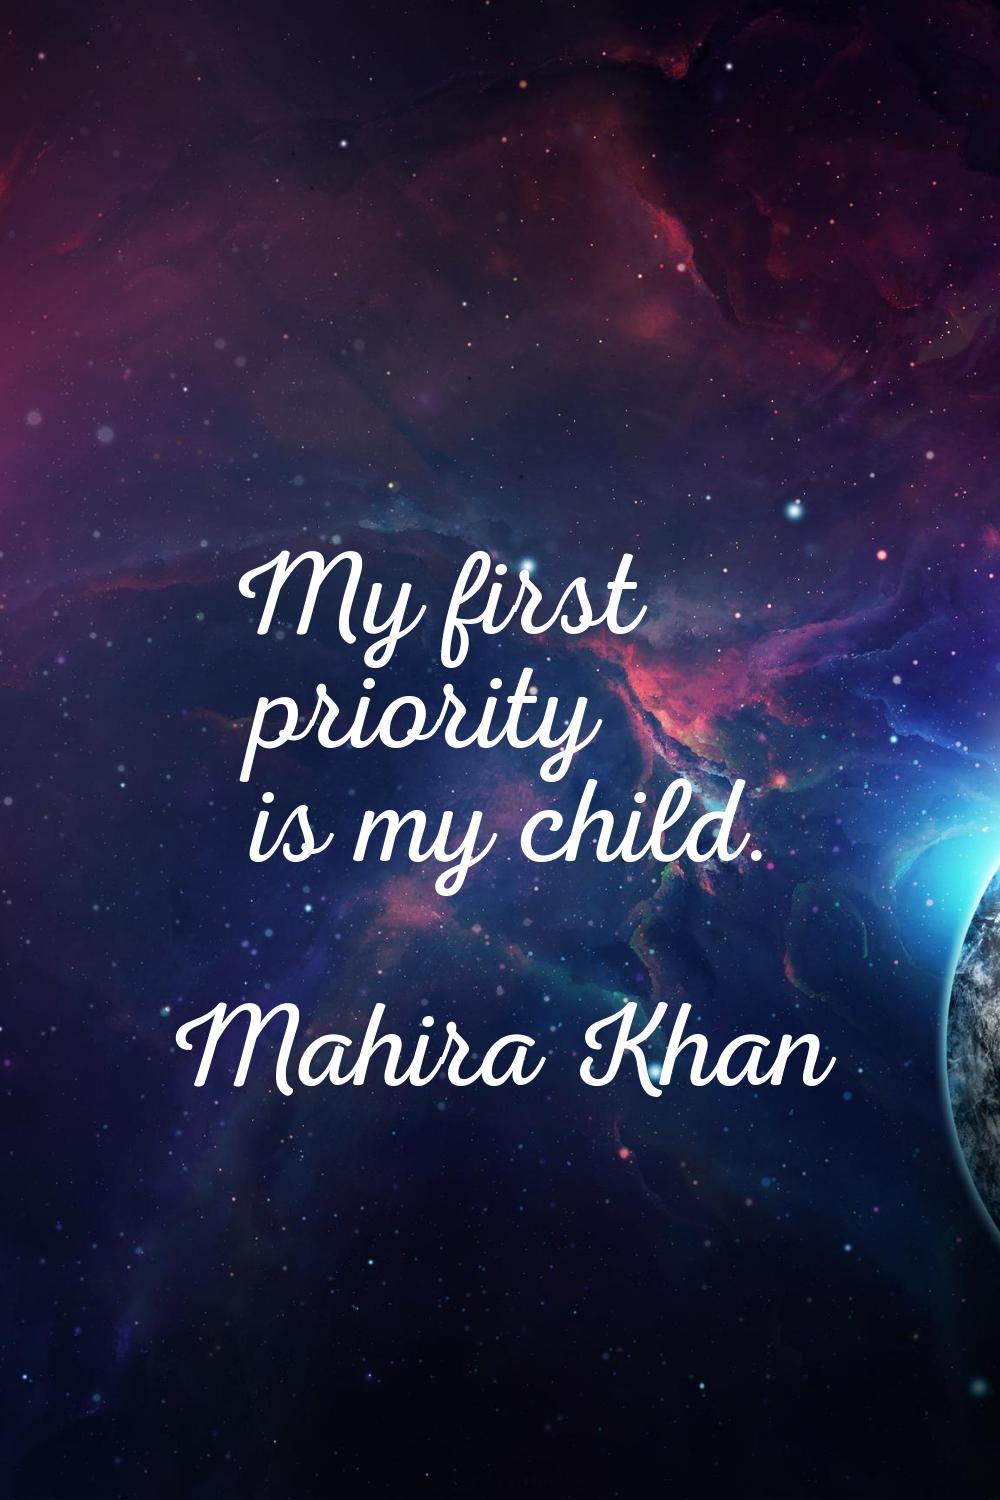 My first priority is my child.